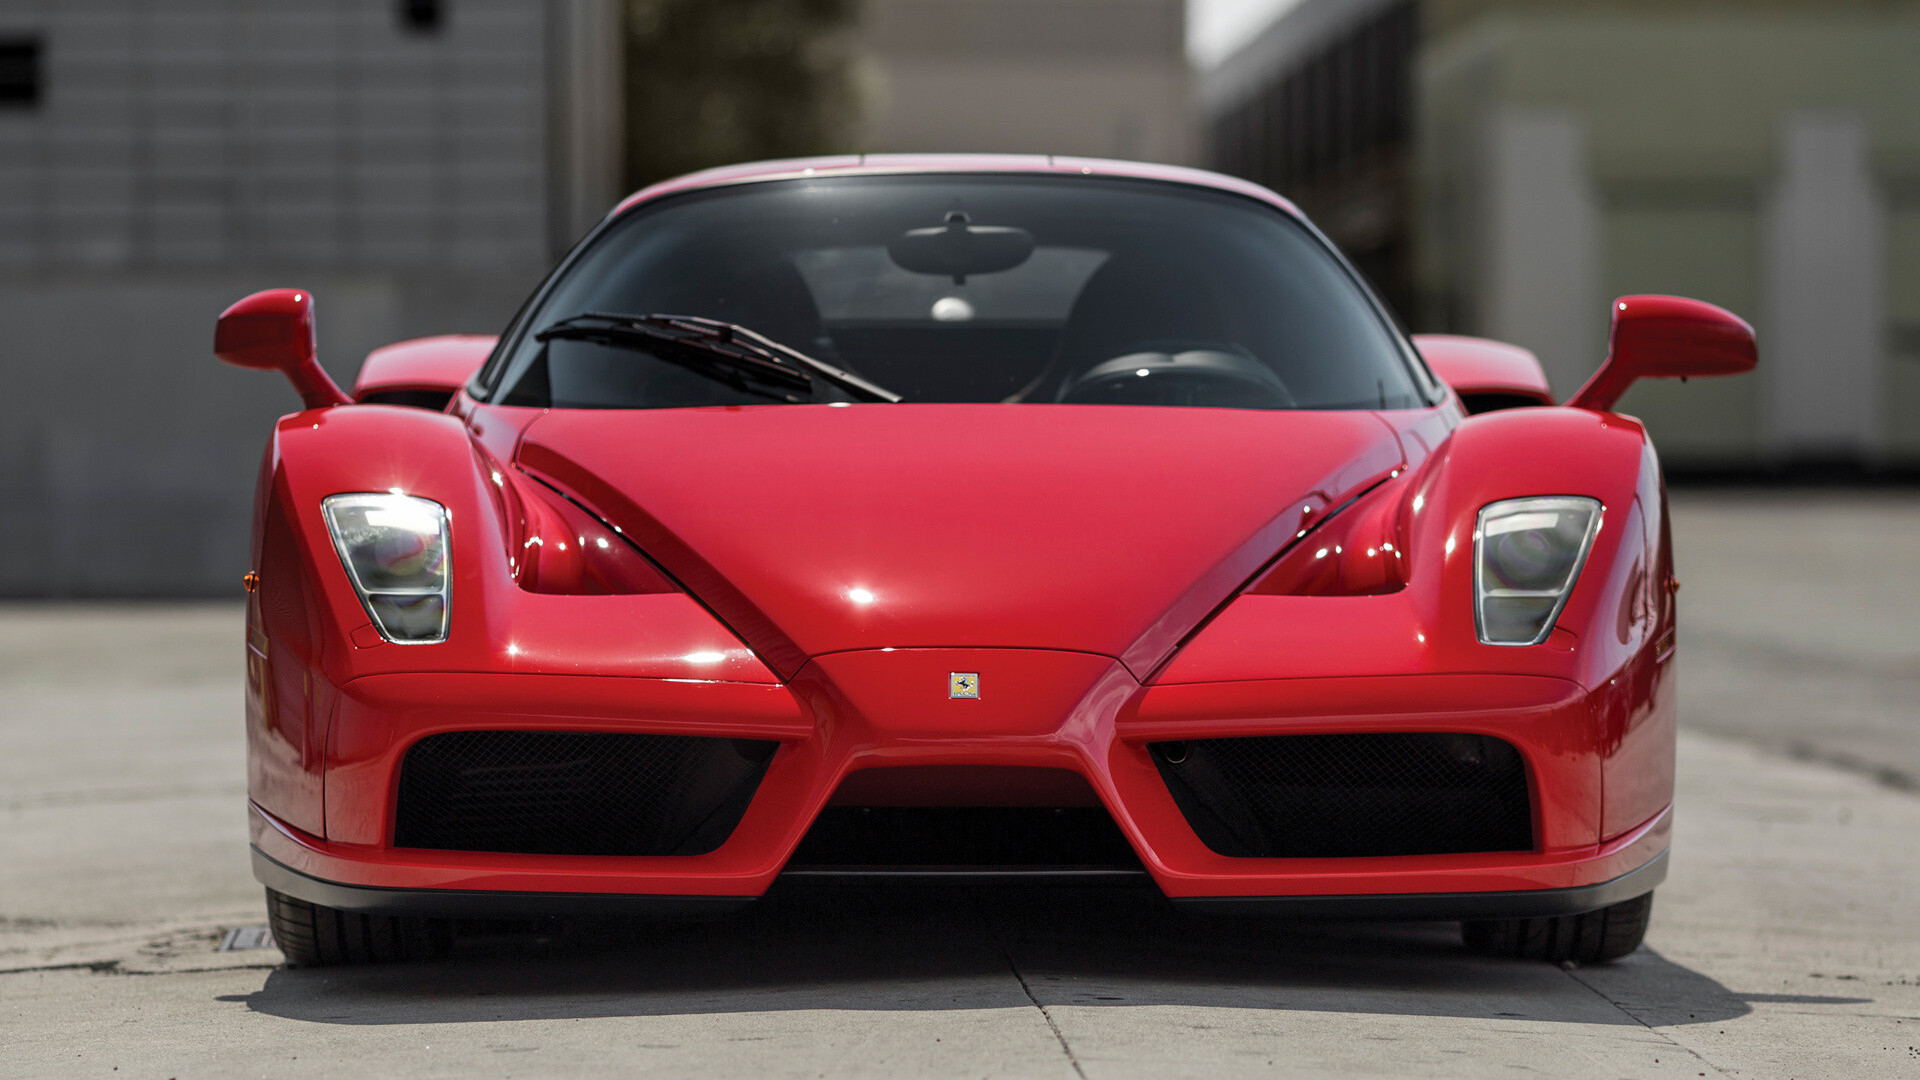 Ferrari: 2002, Enzo, Designed by Ken Okuyama, the then Pininfarina head of design, and initially announced at the 2002 Paris Motor Show with a limited production run of 399 units. 1920x1080 Full HD Wallpaper.